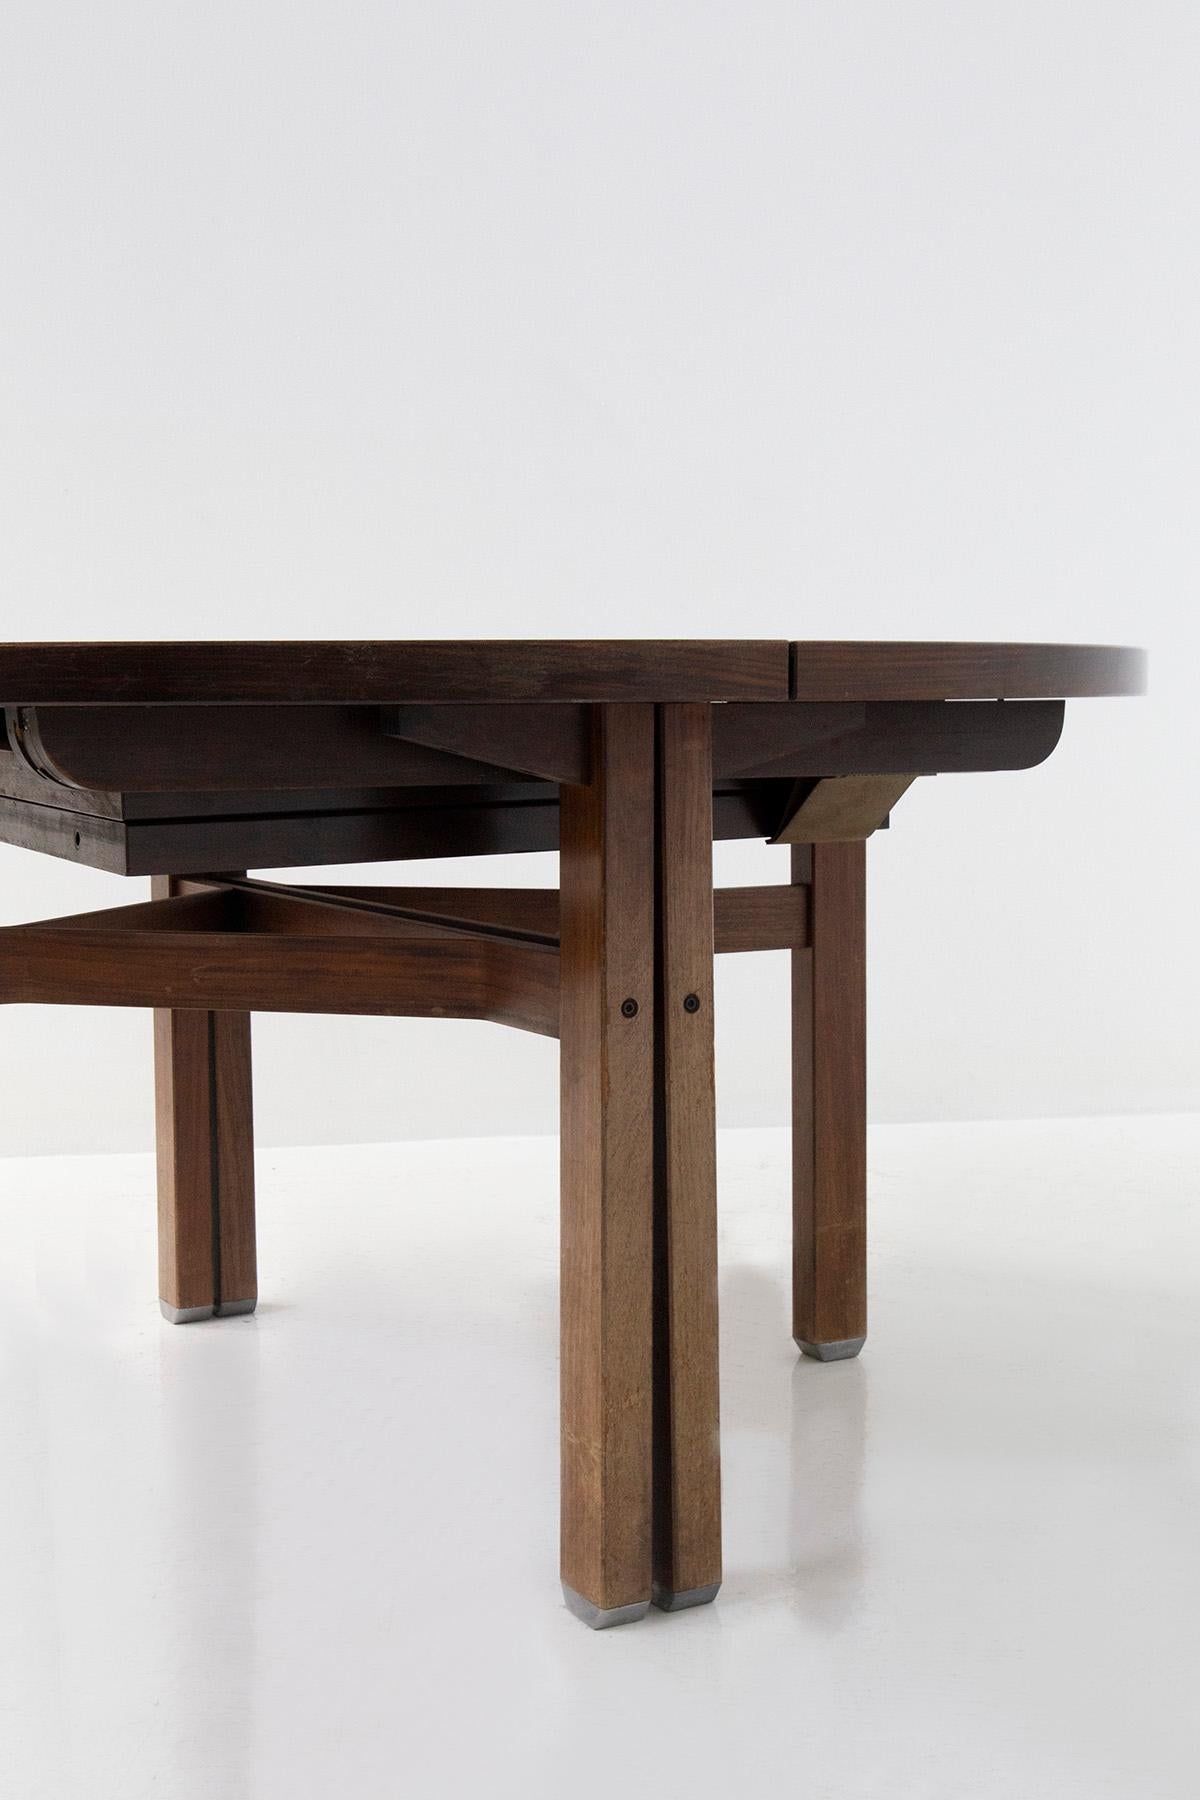 Metal Ico Parisi for MIM Olbia Round Dining Table, Published For Sale